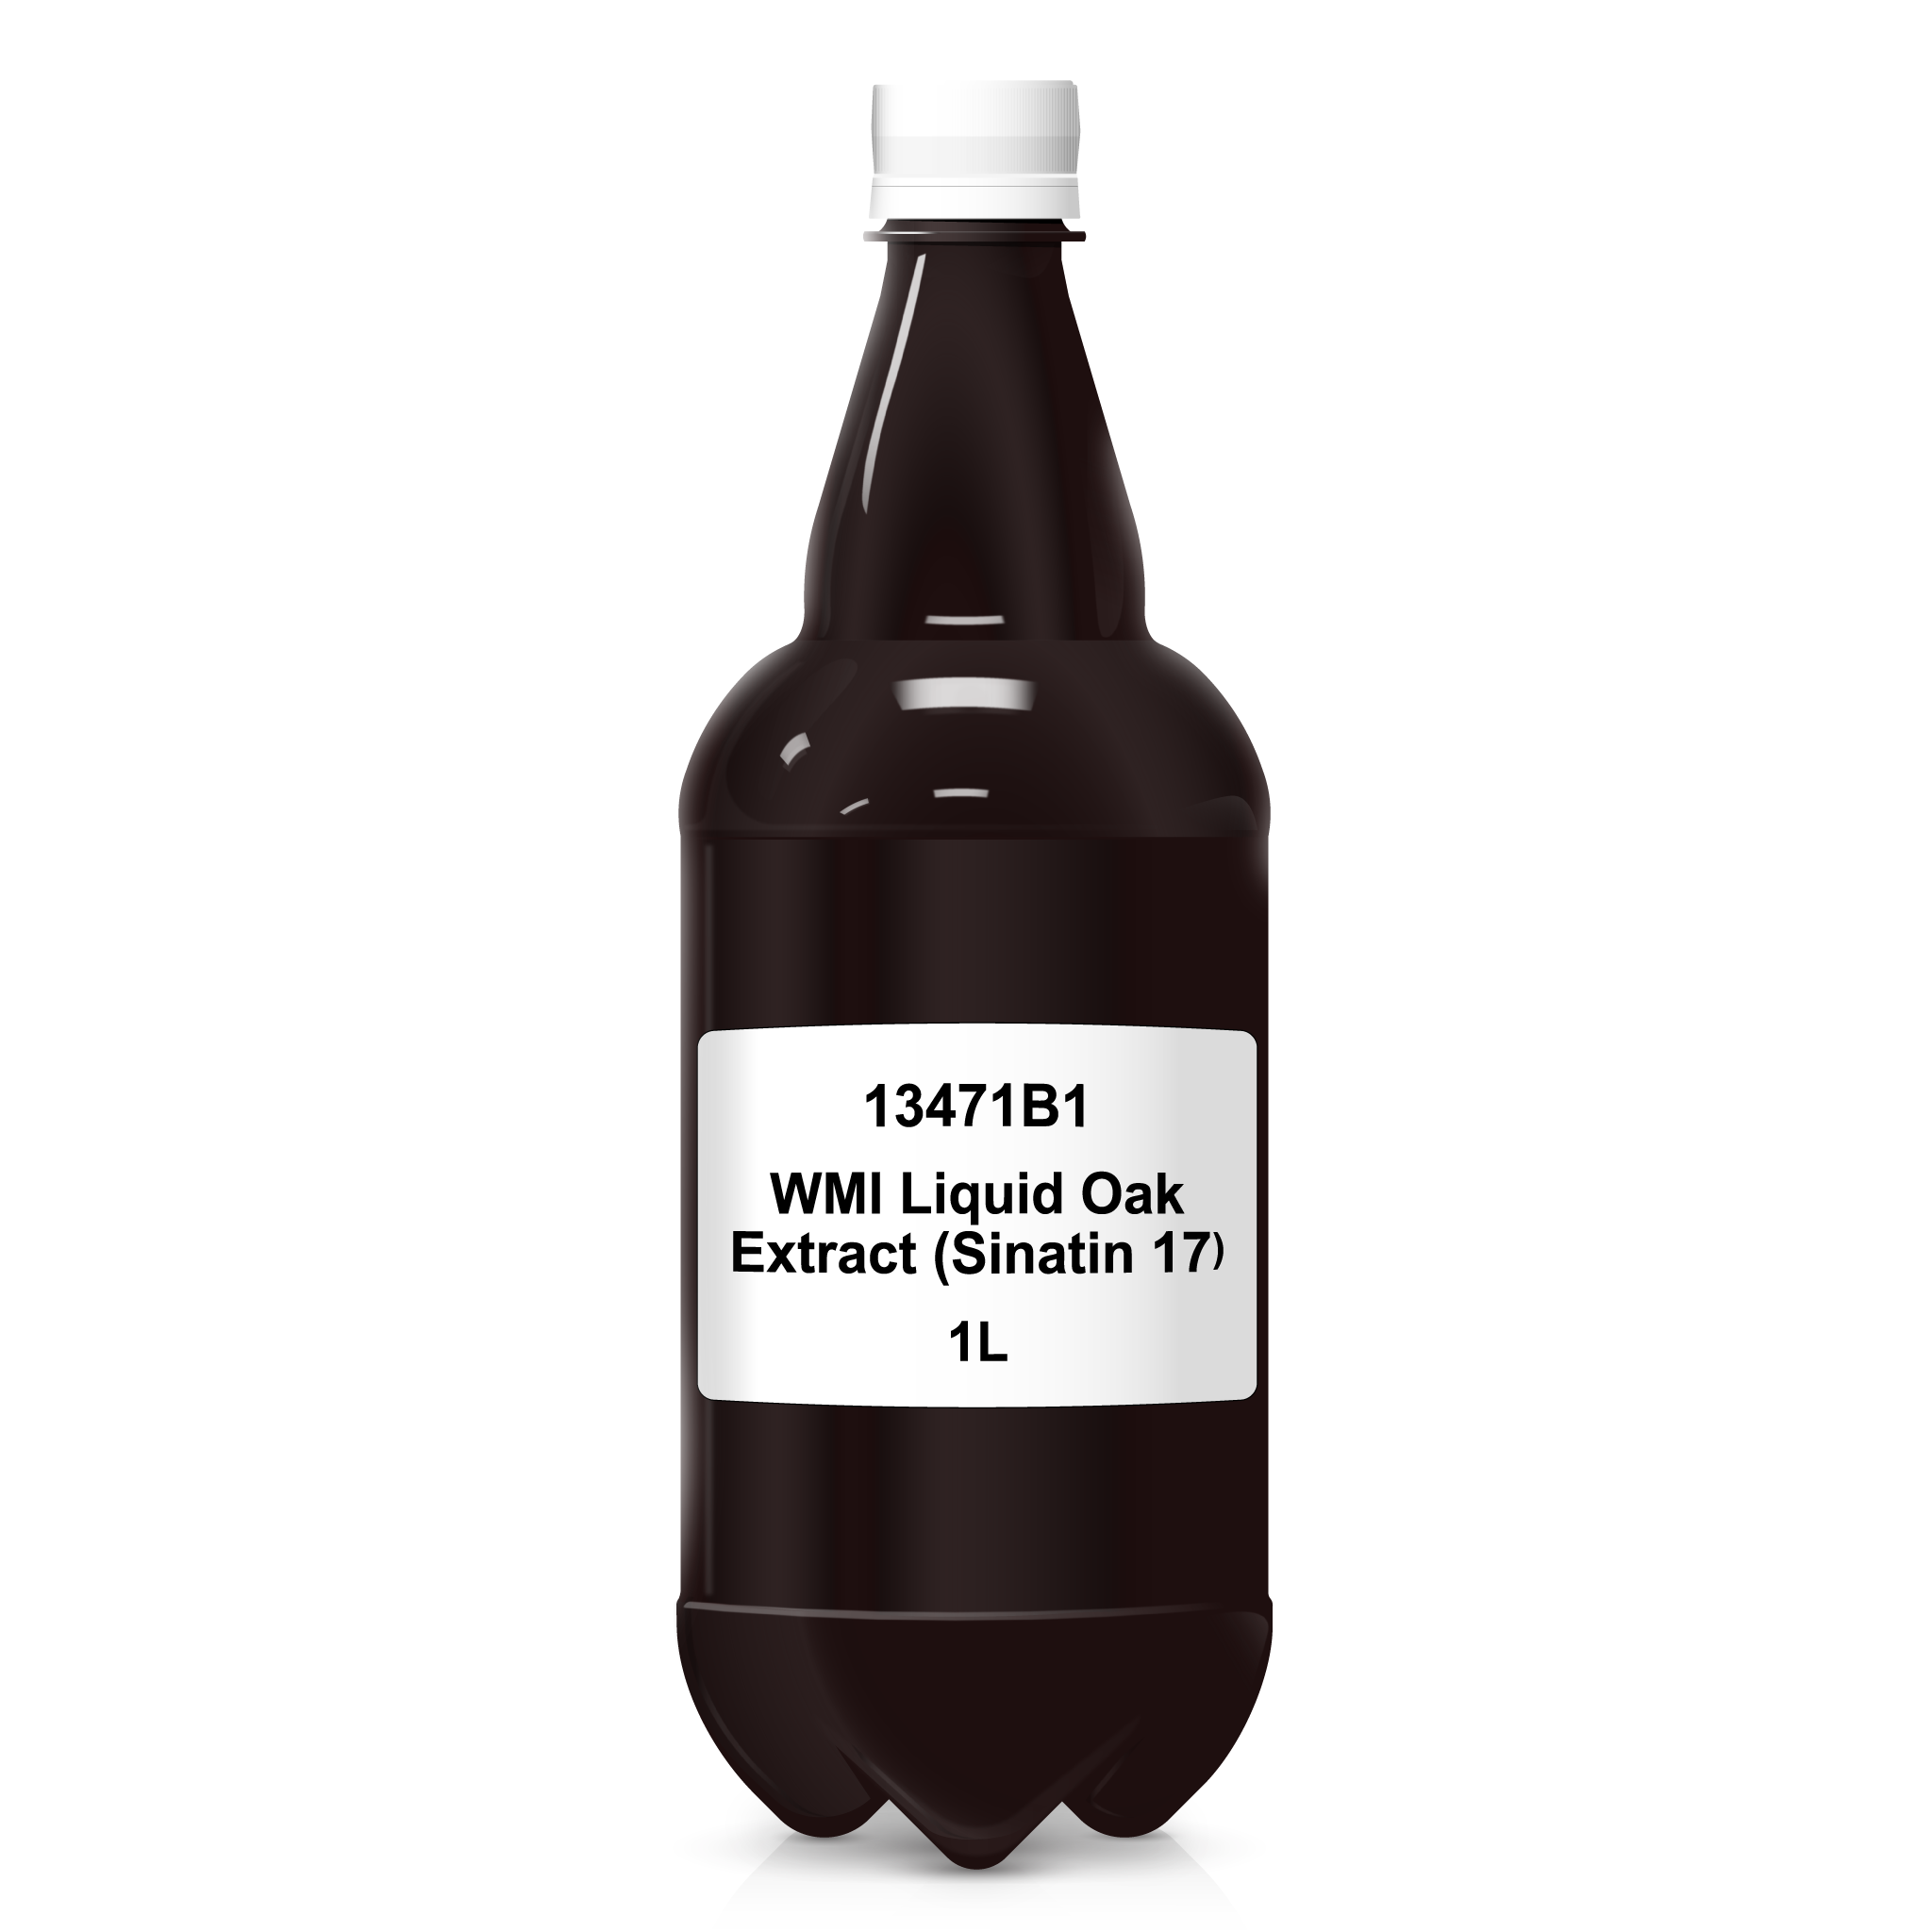 Product image for Liquid Oak Extract (Sinatin 17) - 1L